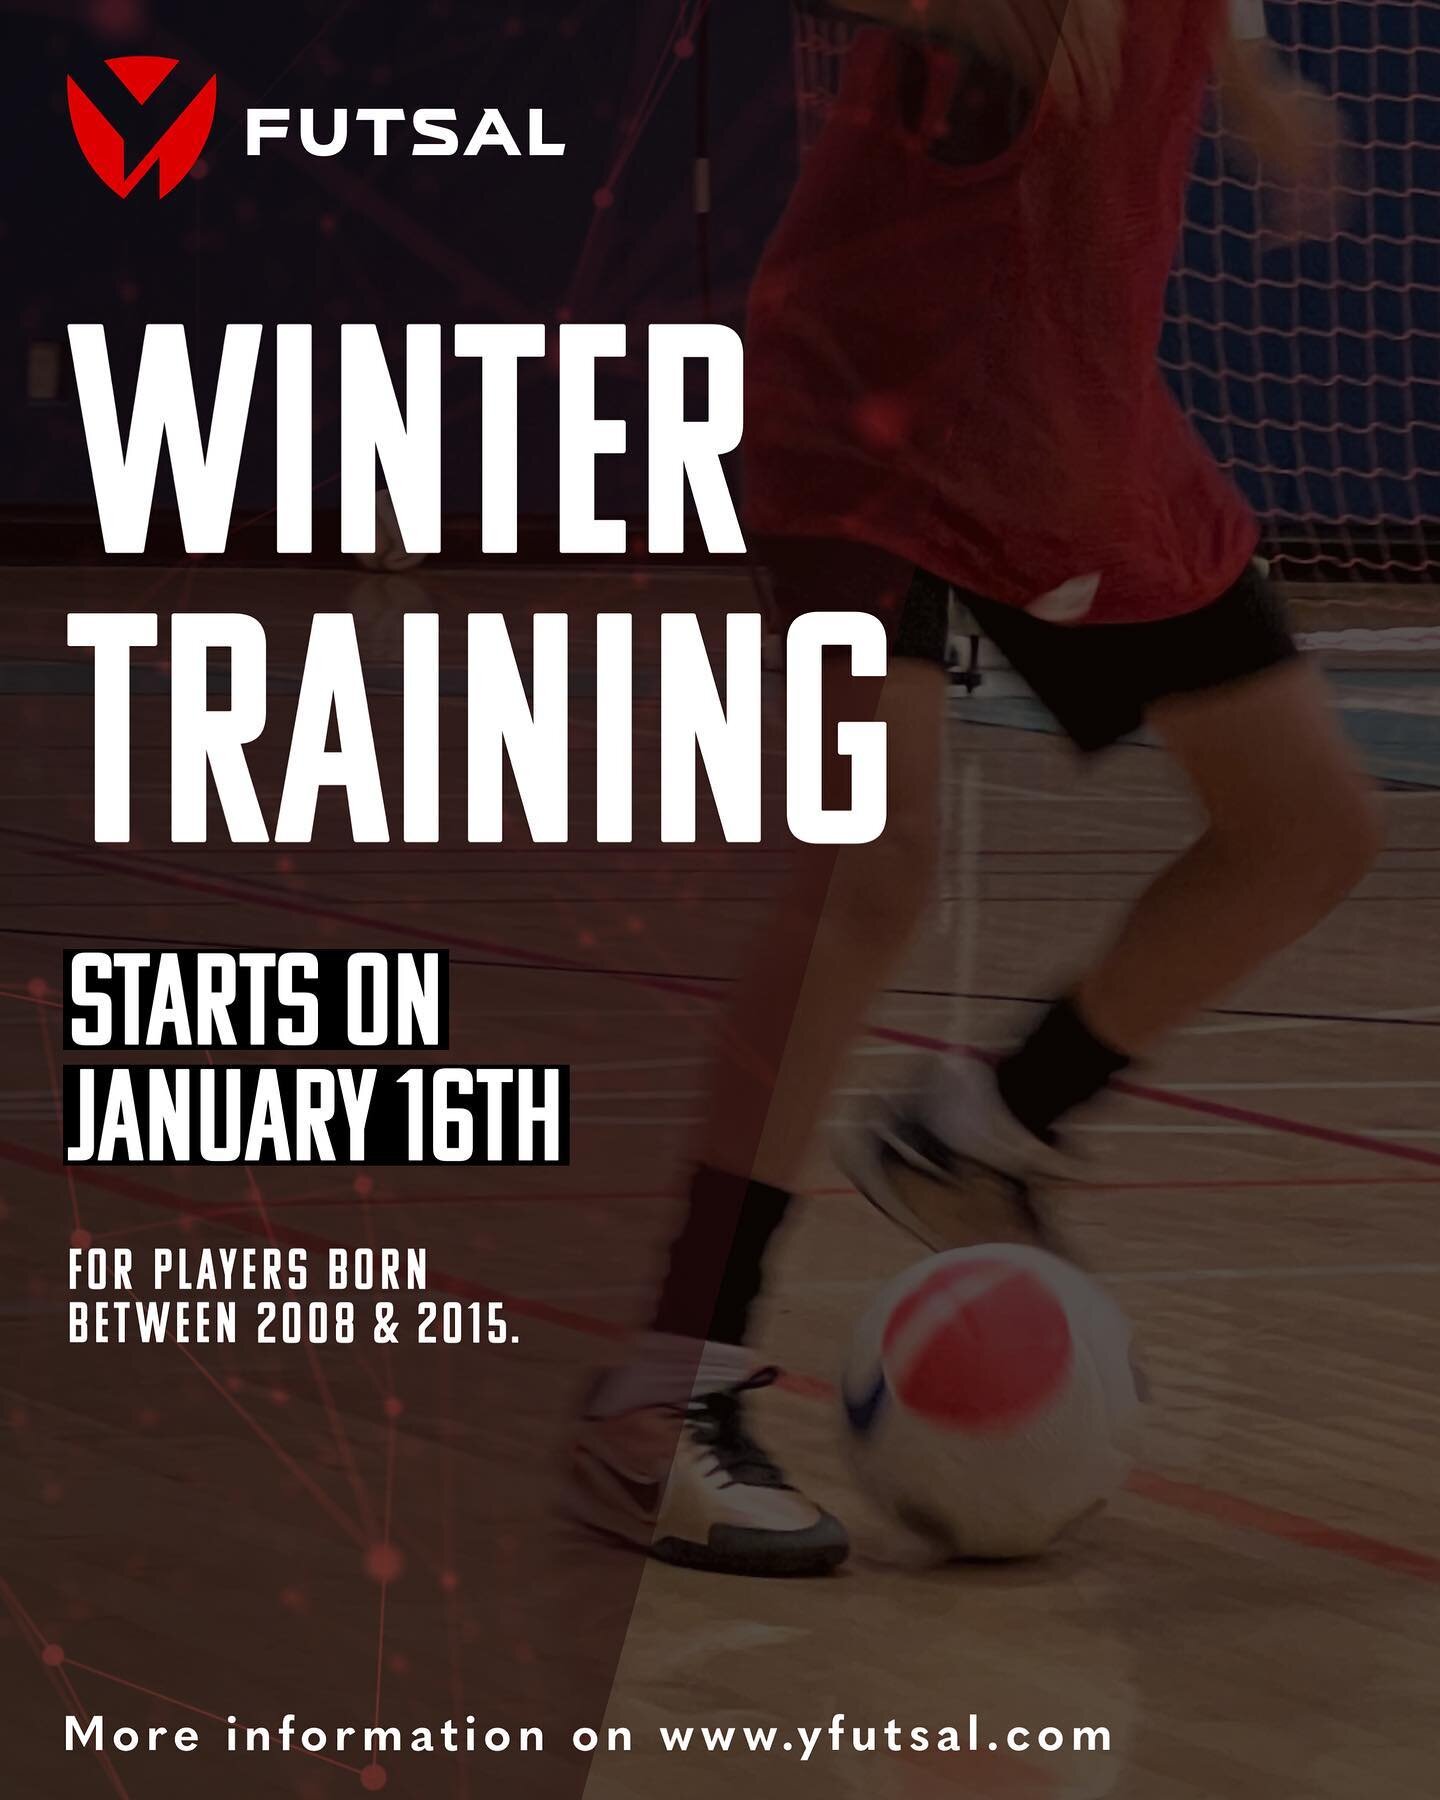 💢 We are very excited to announce that our Winter trainings will begin on January 16th! 

Training will take place in the South Loop on Monday, Wednesday, and Thursday evenings for players born between 2008 and 2015. 

You can purchase a single clas